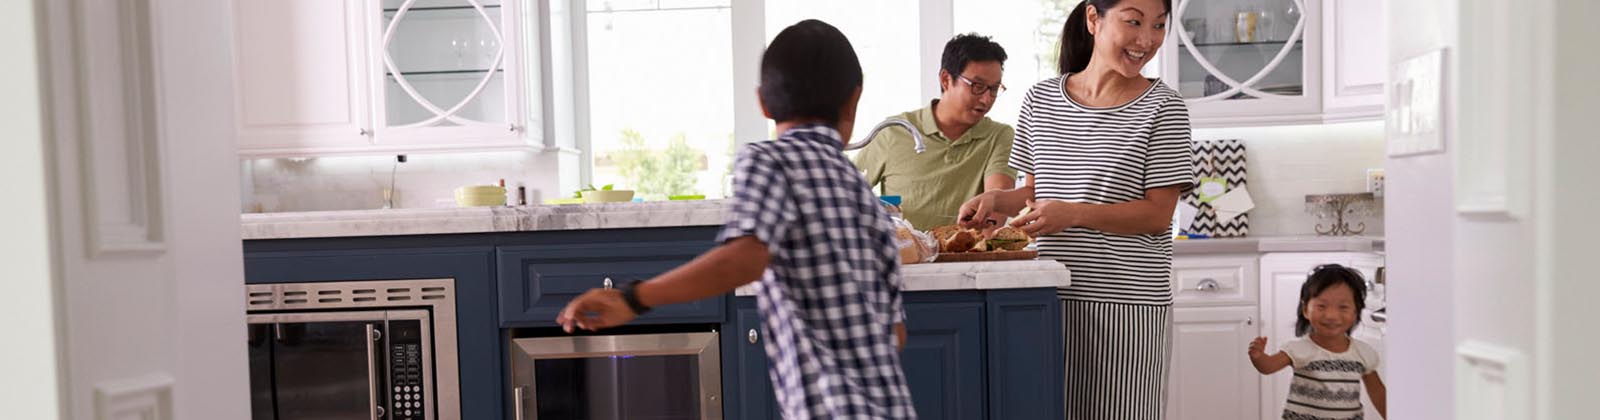 family in a kitchen smiling while two young children play